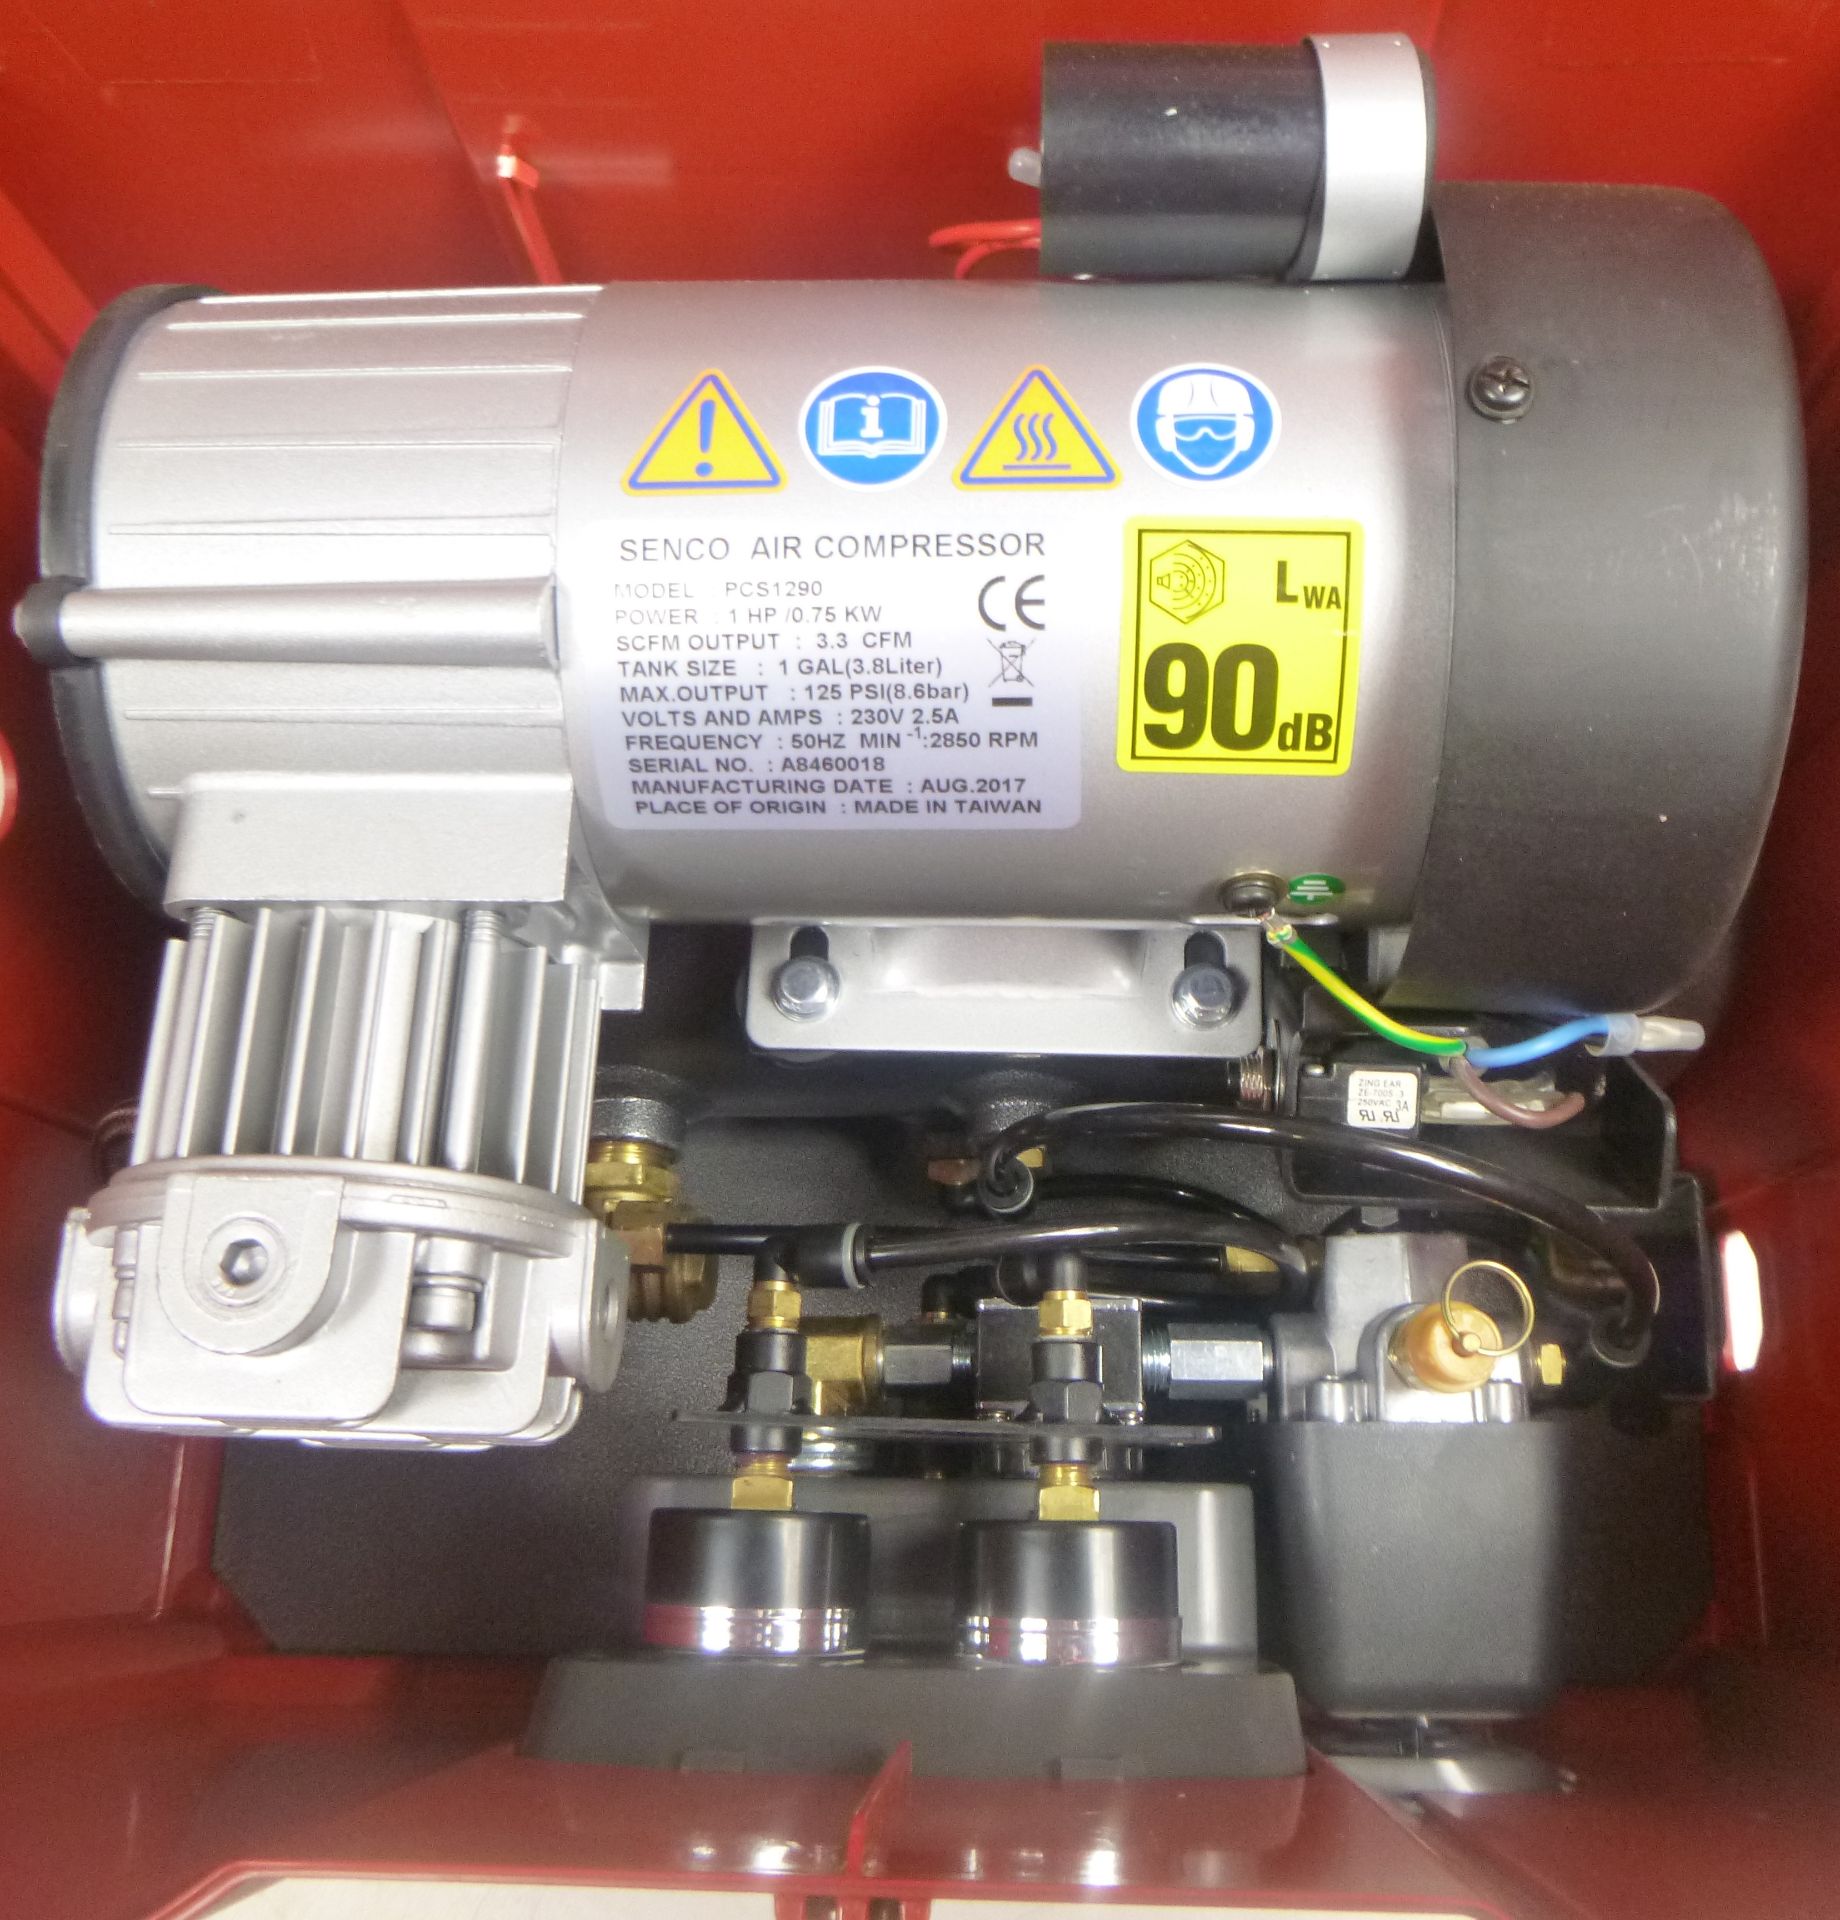 1 x Senco PCS1290 Air Compressor in Systainer Form Fits Festool Systainer - 230V | RRP £645 - Image 2 of 2